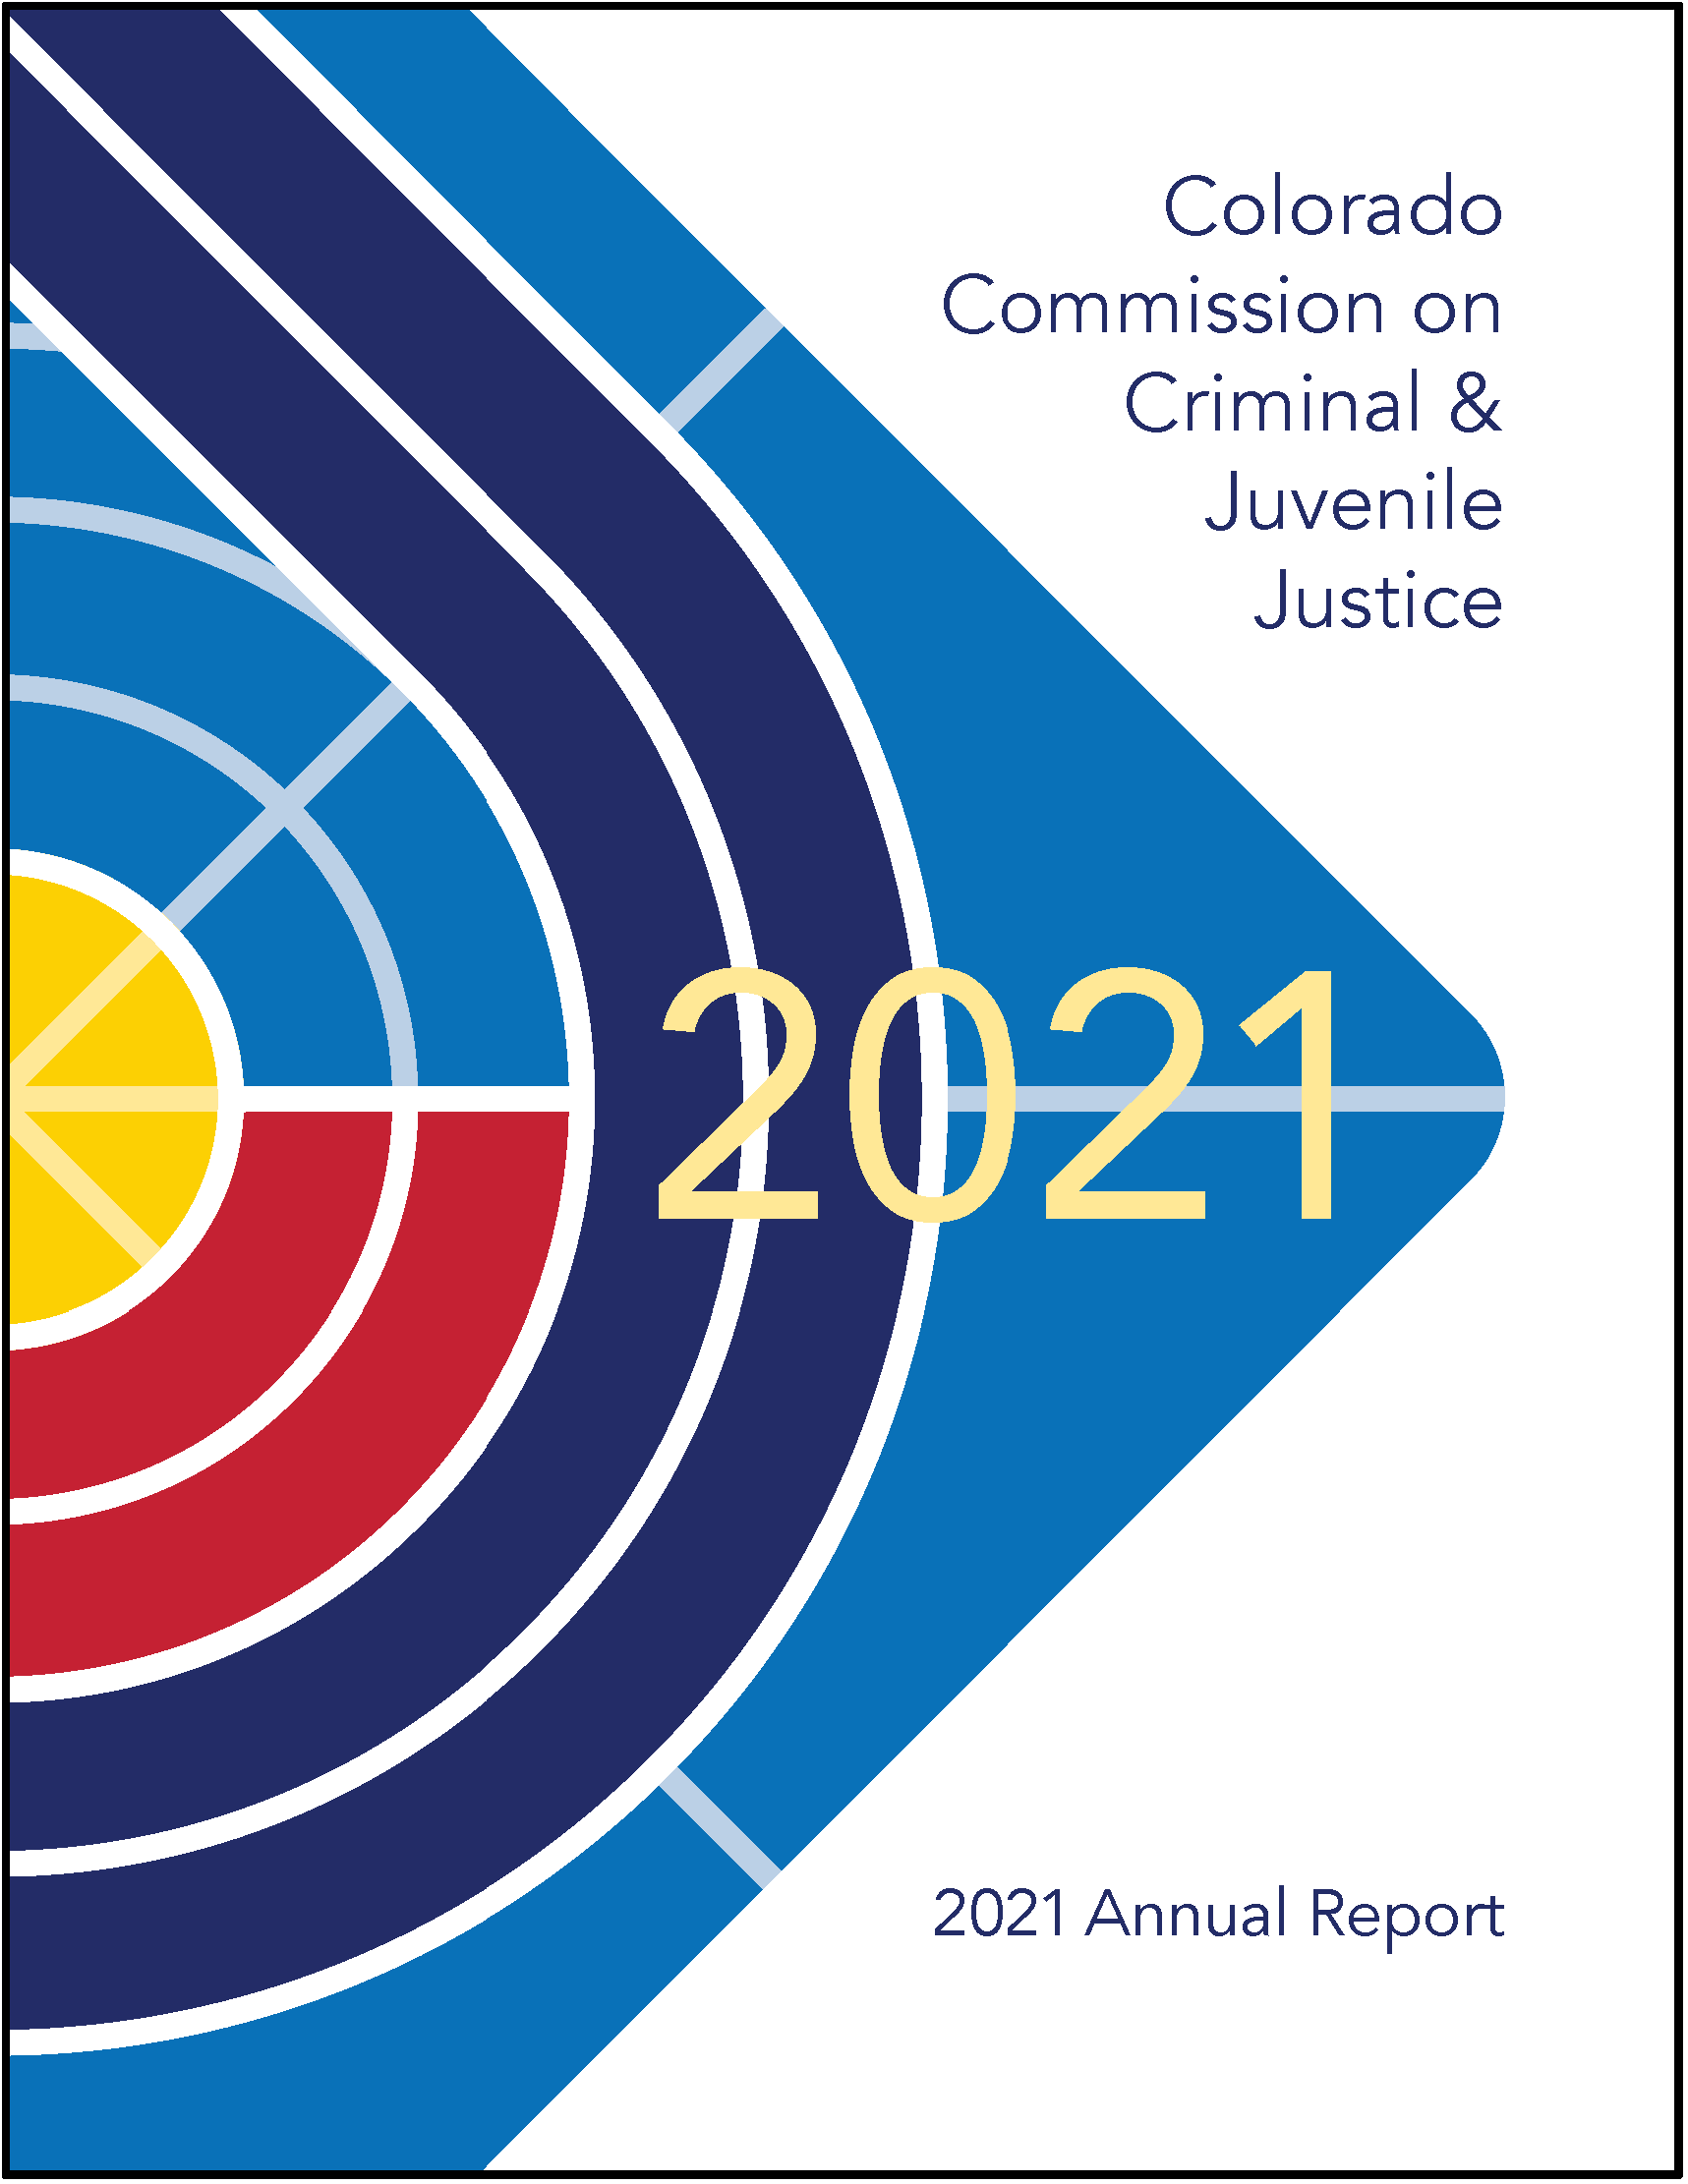 Colorado Commission on Criminal and Juvenile Justice: FY 2021 Annual Report (December 2021)